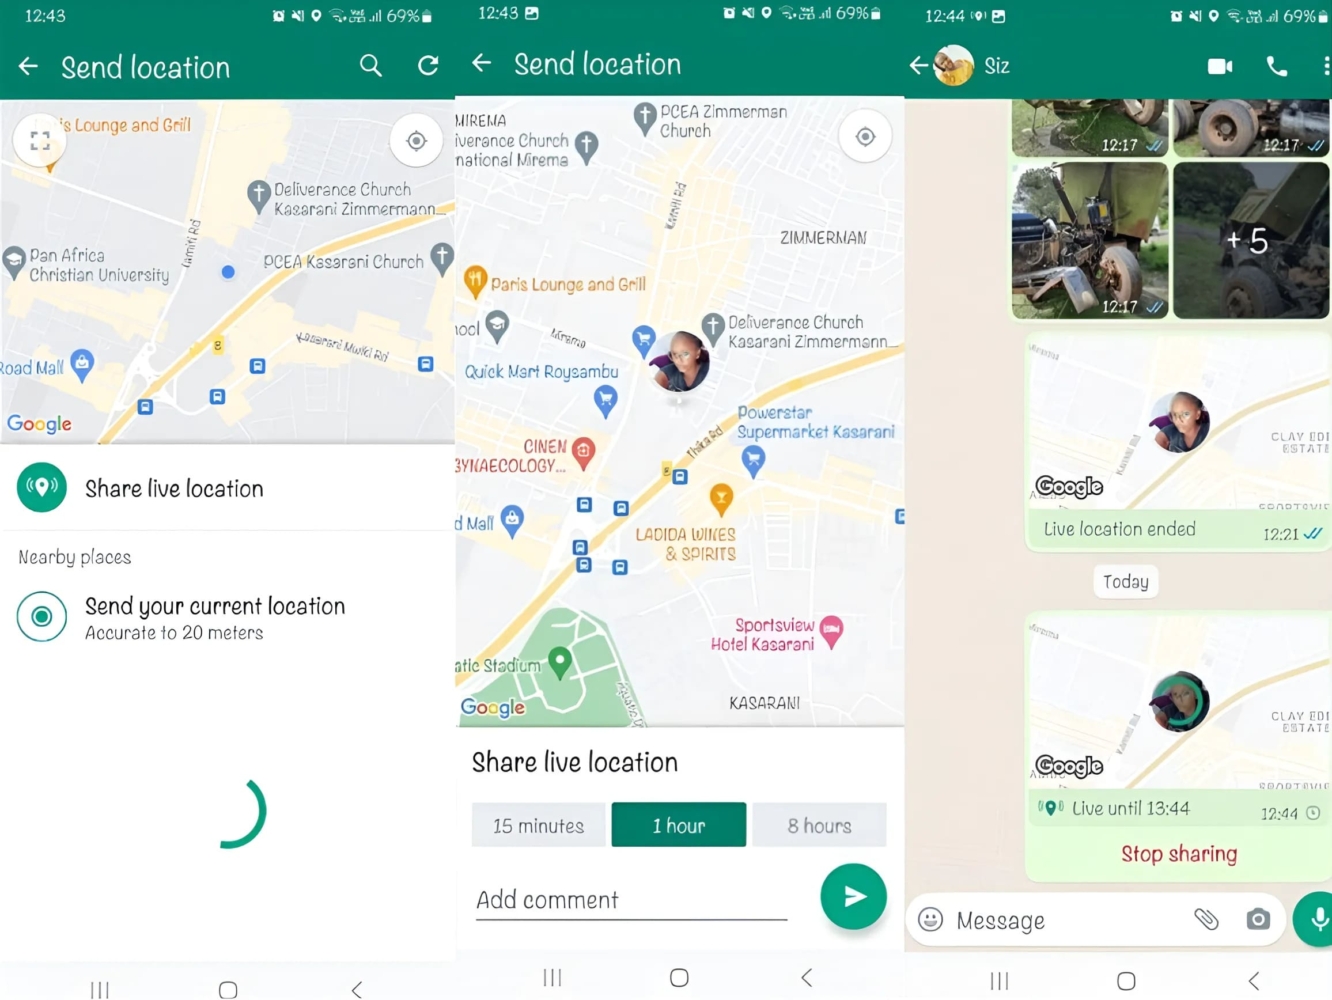 An image of live location sharing on the WhatsApp messaging app